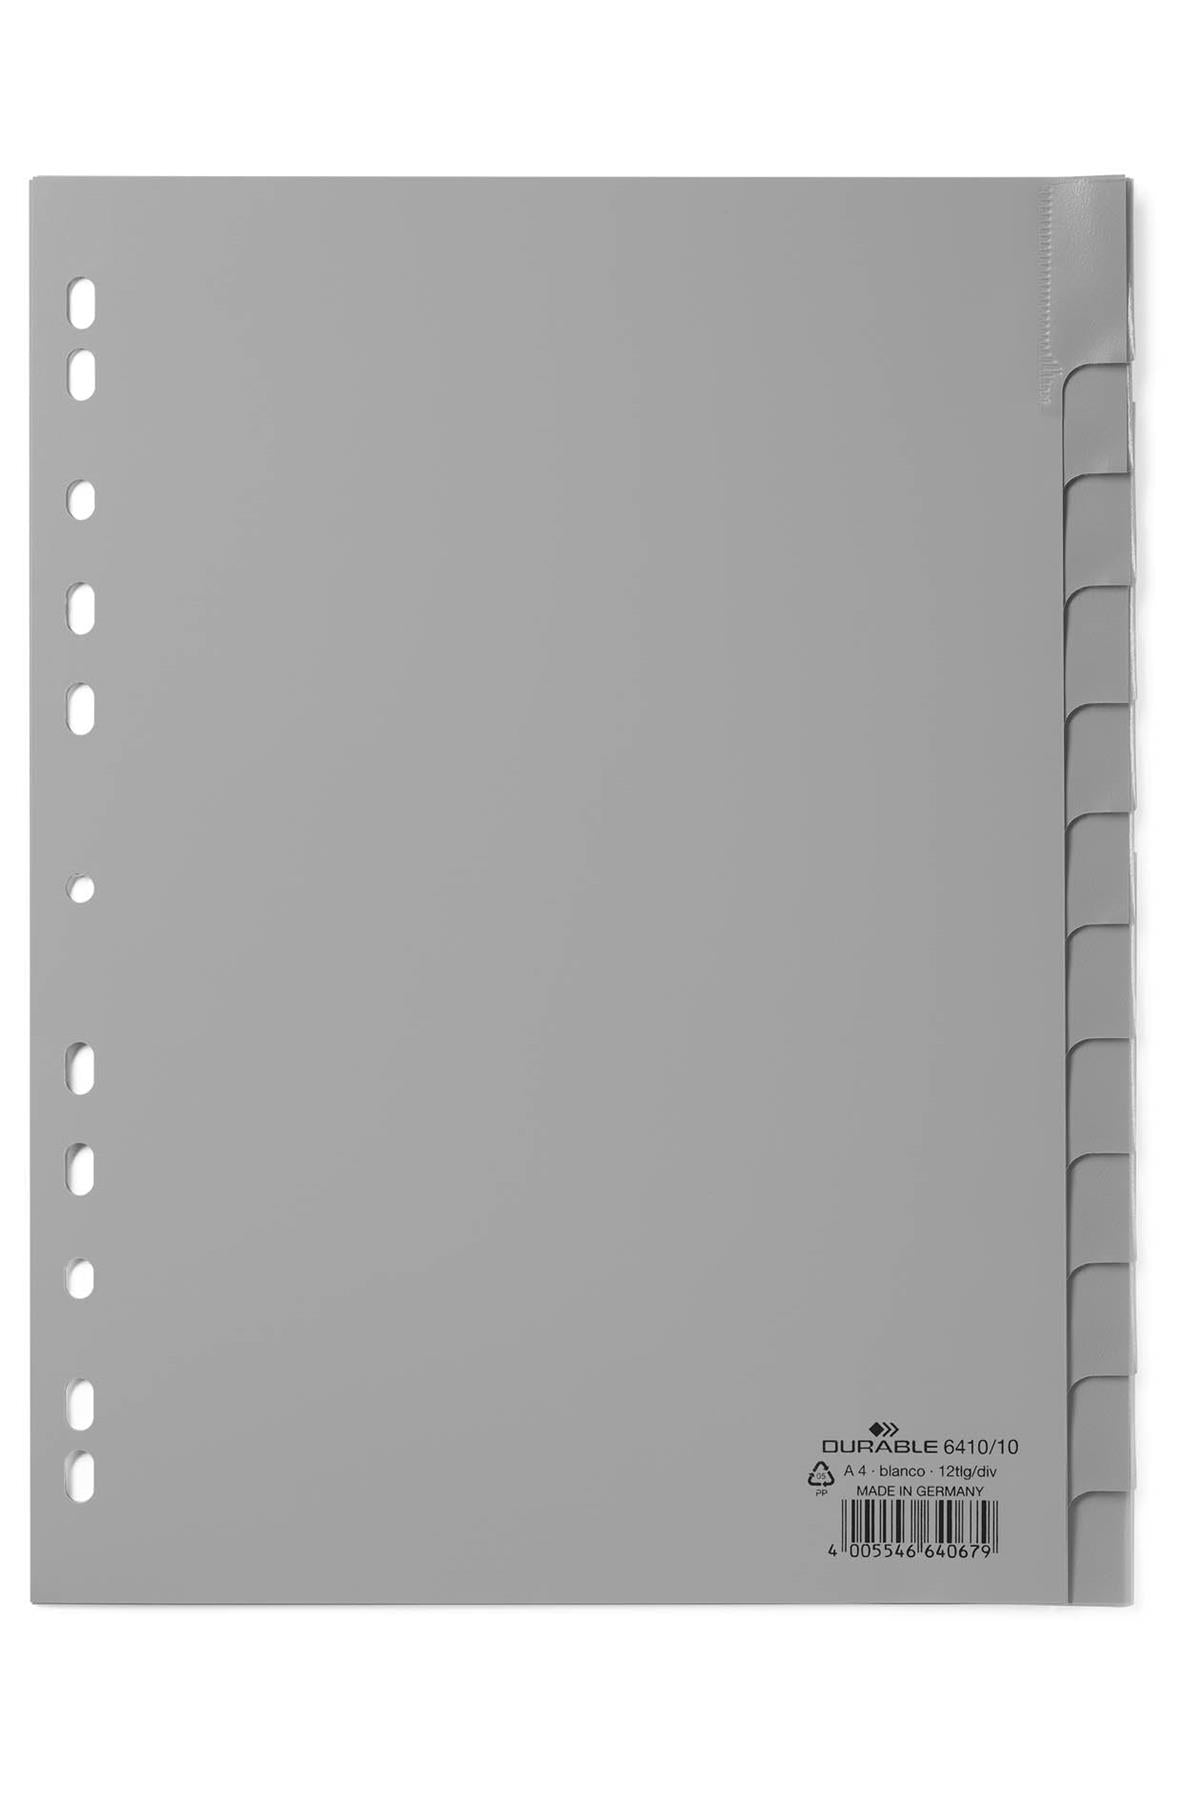 Durable 12 Part Removable Tab Reinforced Punched Index Divider | A4 | Grey